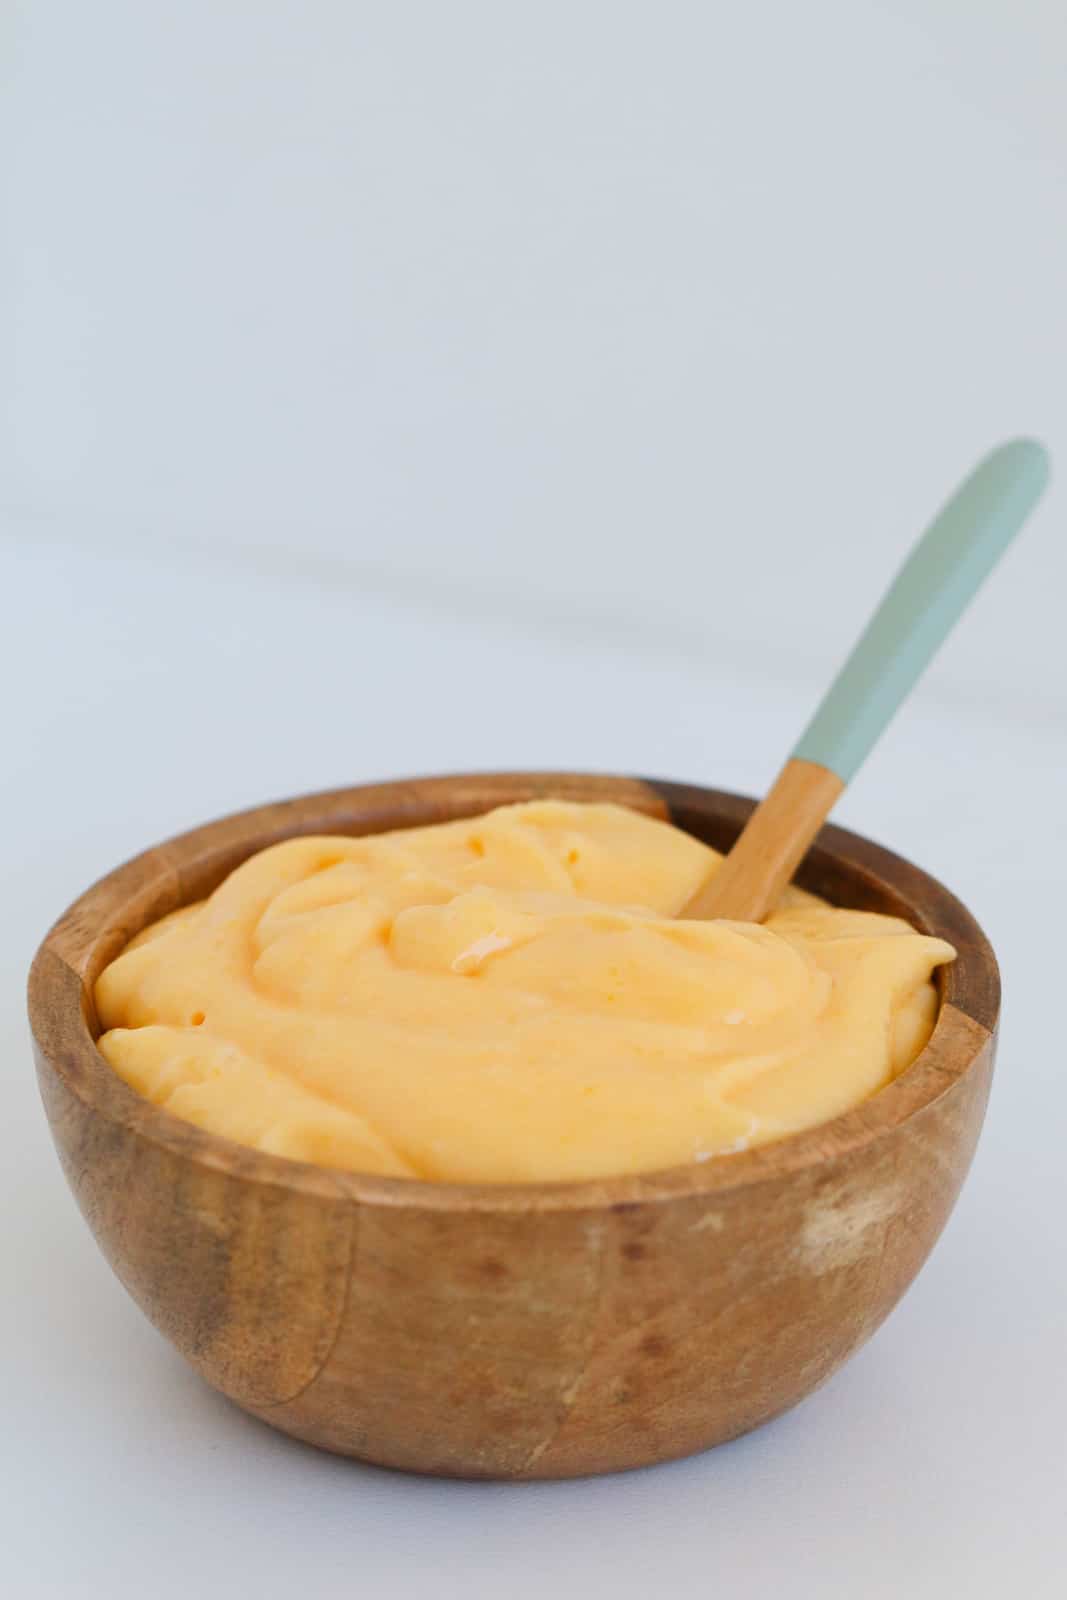 A spoon in a small wooden bowl filled with creamy yellow lemon curd.